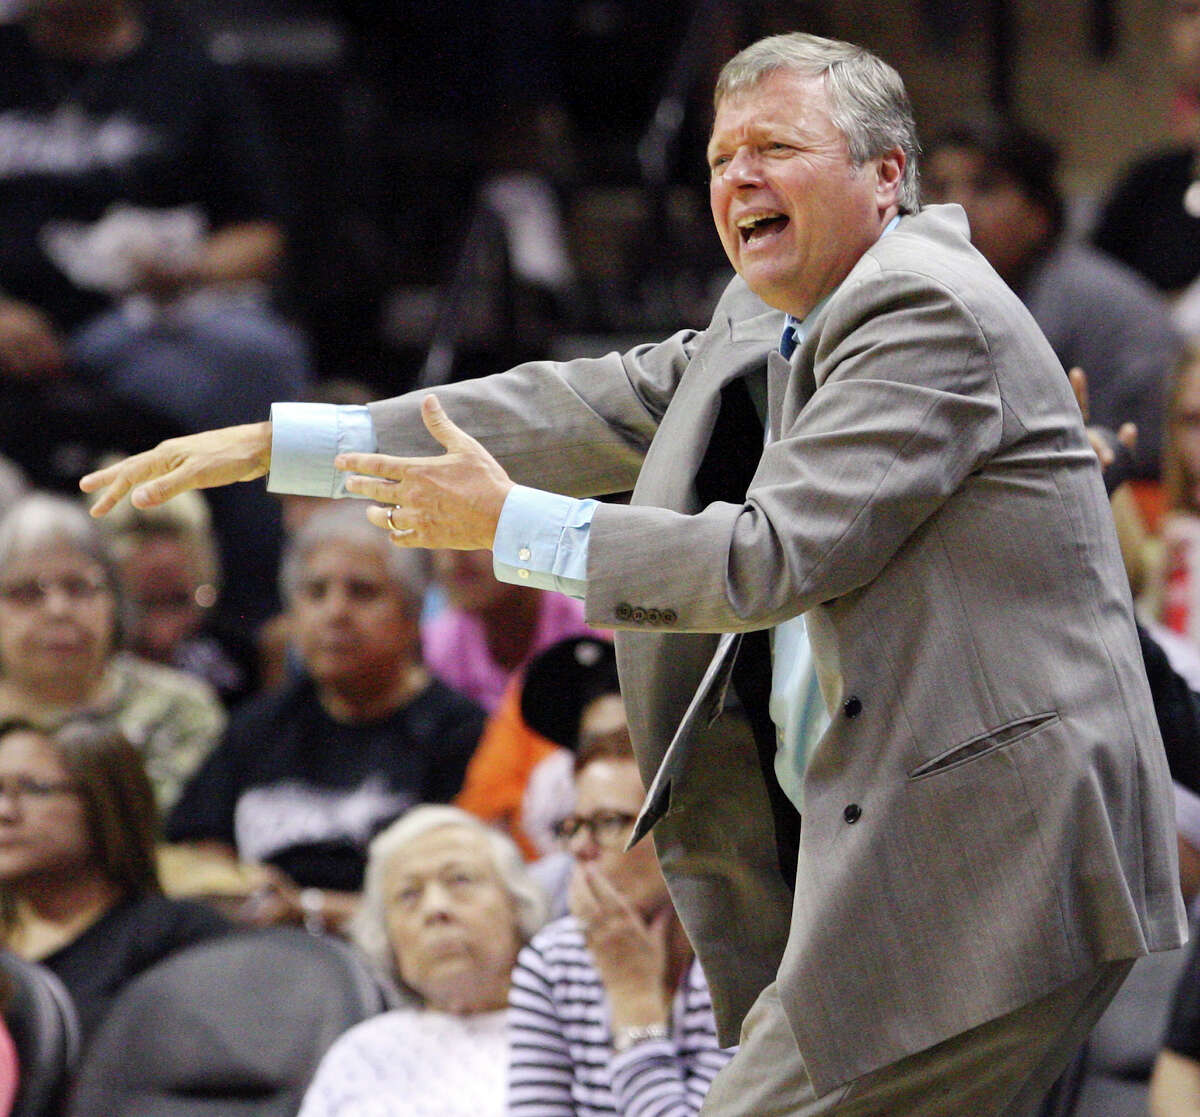 Silver Stars' headcoach Dan Hughes reacts after a call during second half action against the Dream Friday, July 13, 2012 at the AT&T Center. The Stars won 91-70.